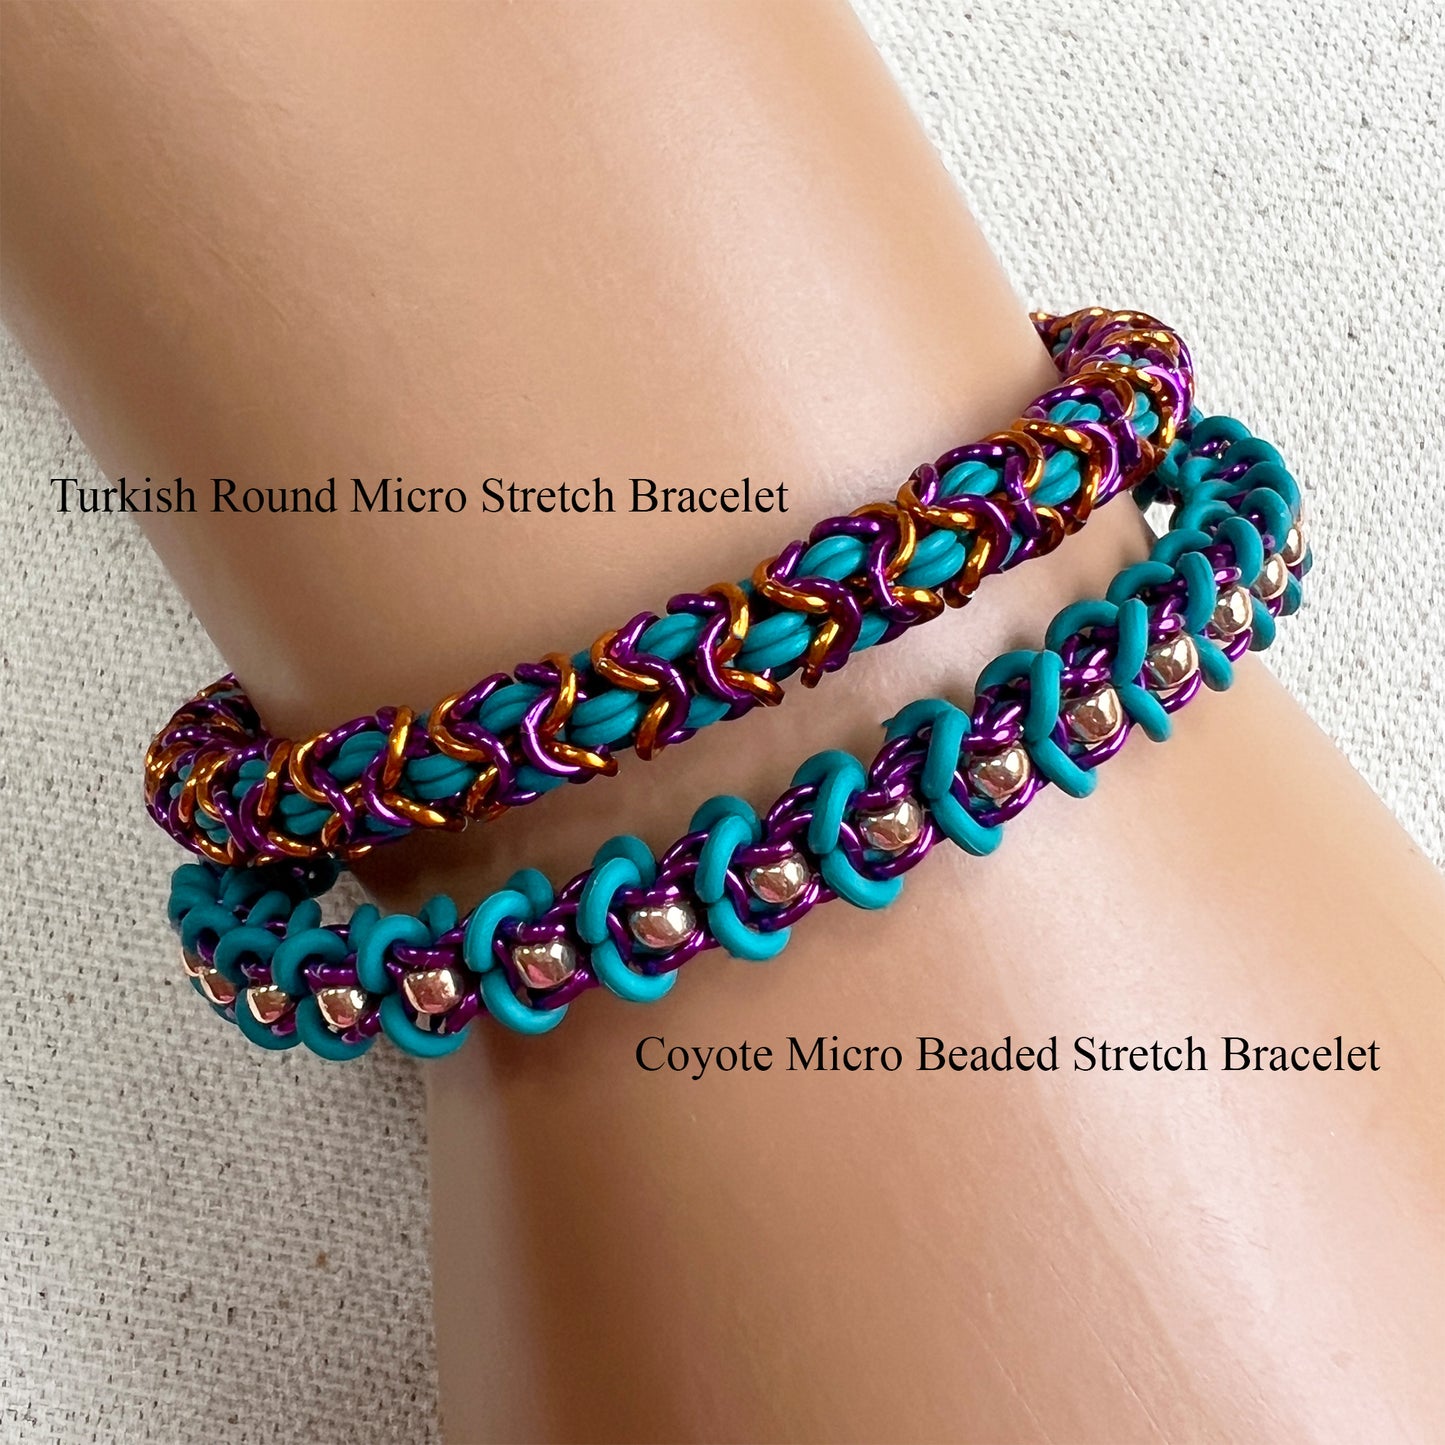 Coyote Micro Beaded Stretch Bracelet Kit with Video Class -Teal, Violet & Rose Gold